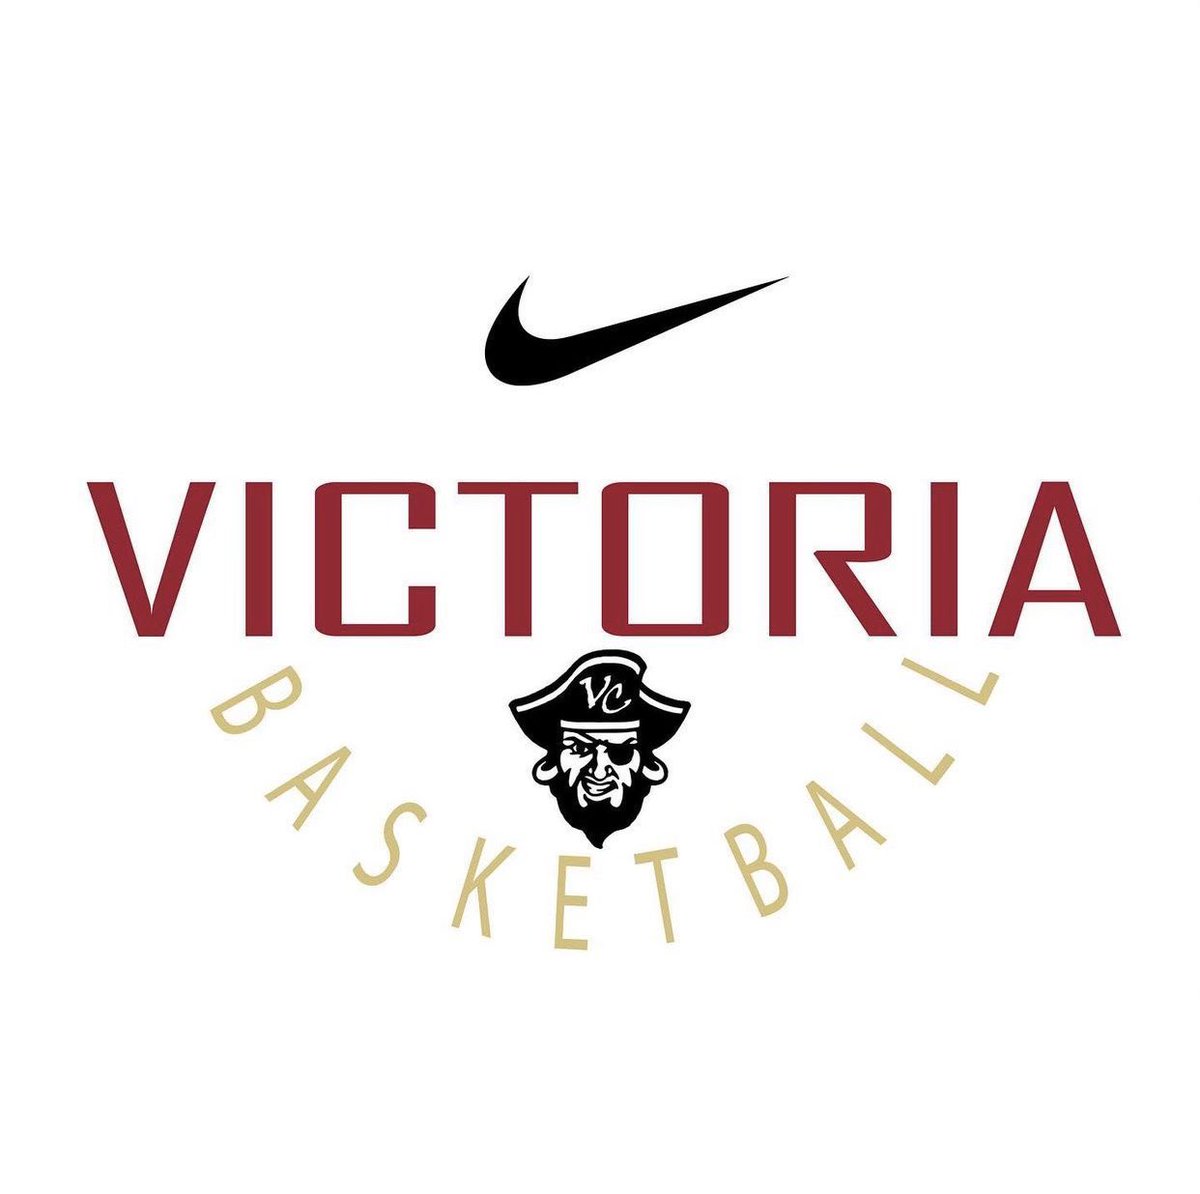 I am extremely blessed and very grateful to say that I have received my 1st offer from Victoria college🏴‍☠️. Thank you to @Coach_Tr3 and @CoachDonteDavis. @VWHSBasketball @UncommonBball @Showtime_361